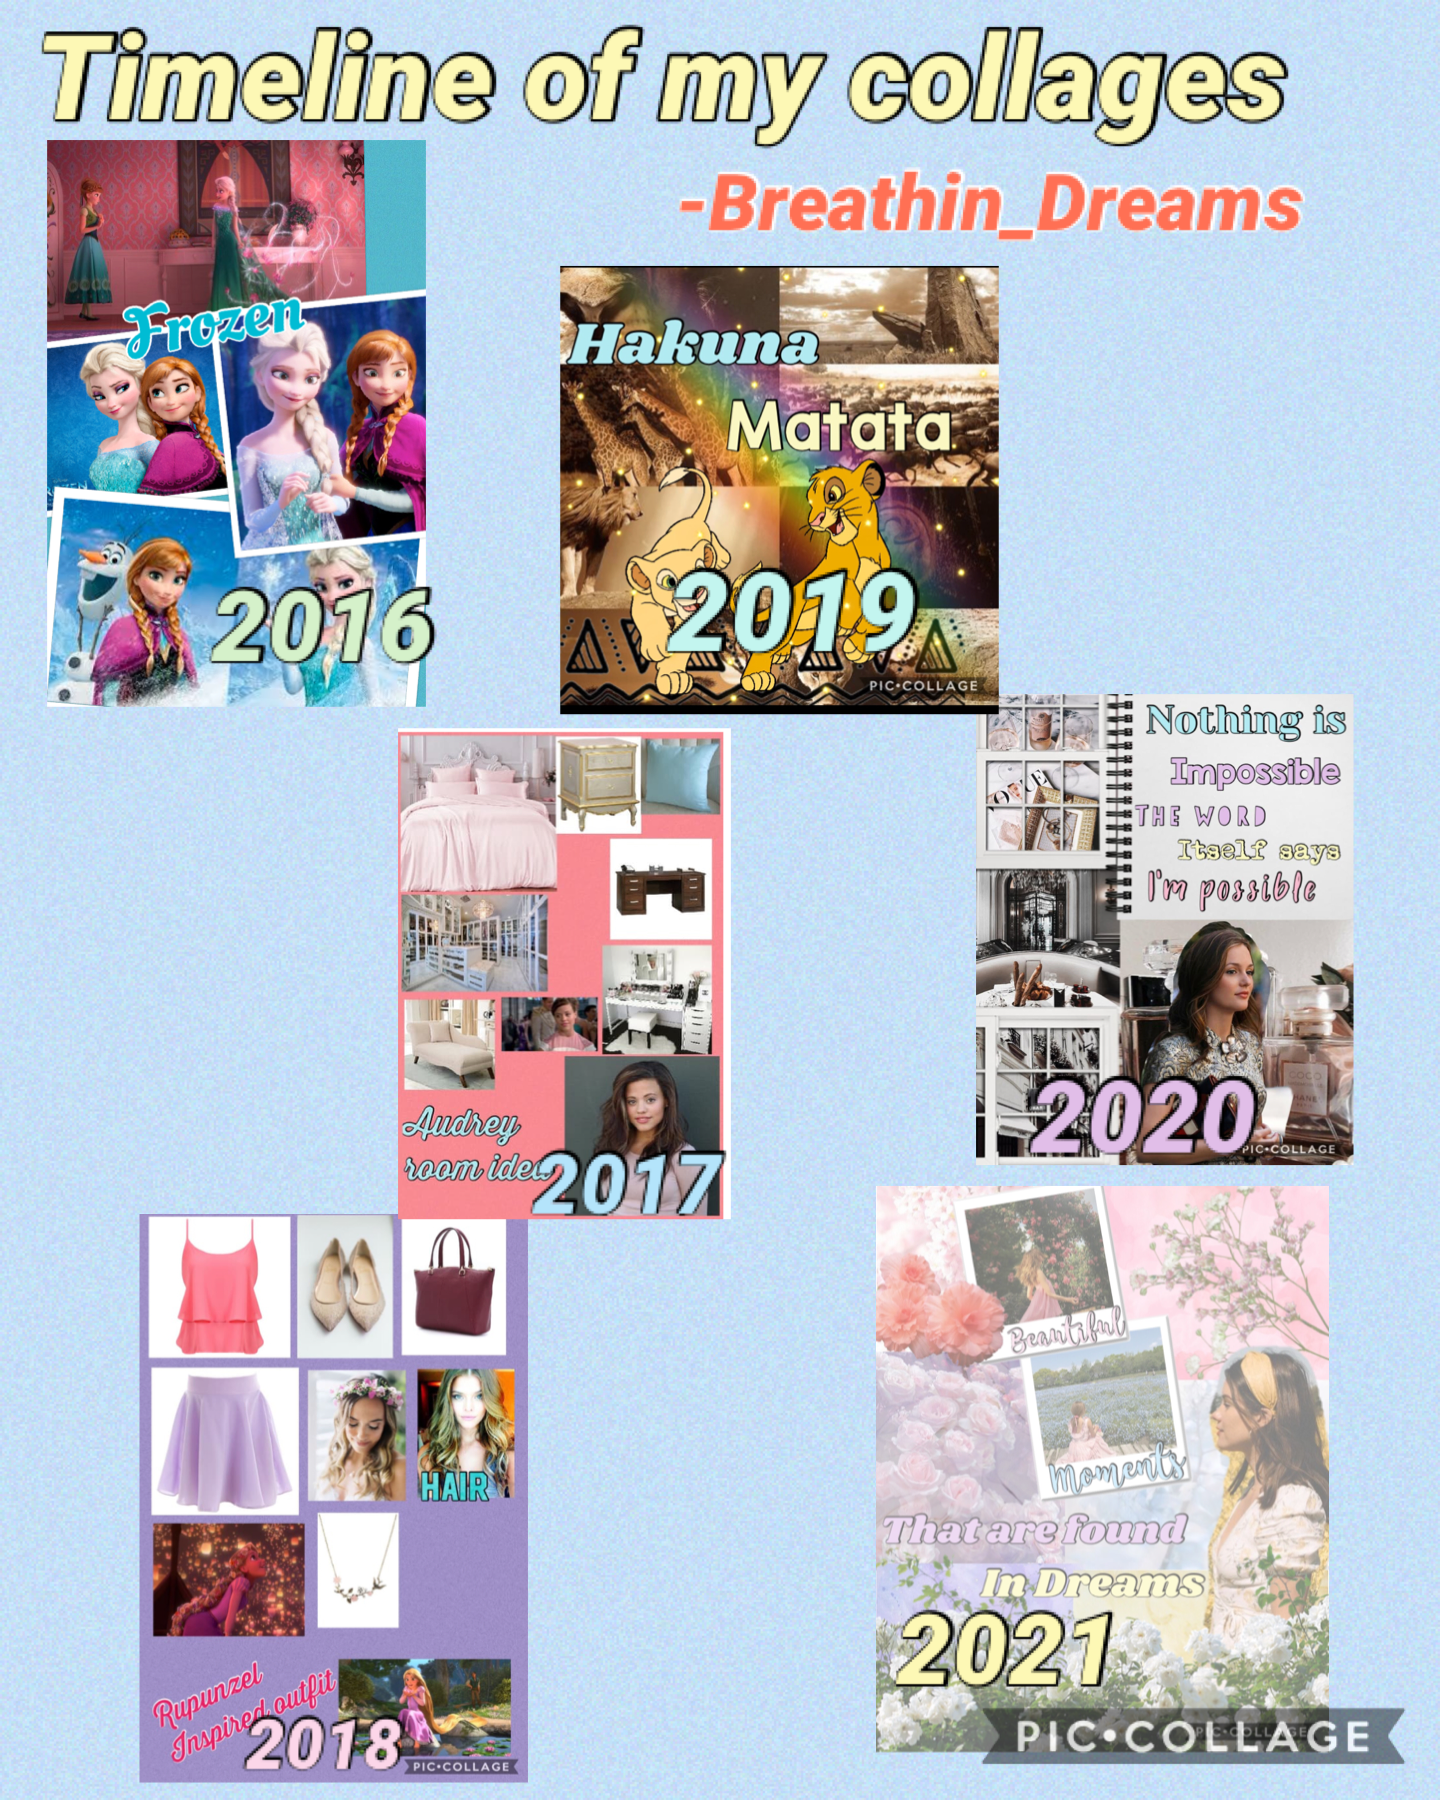 Timeline of my collages on my main account Breathin_Dreams